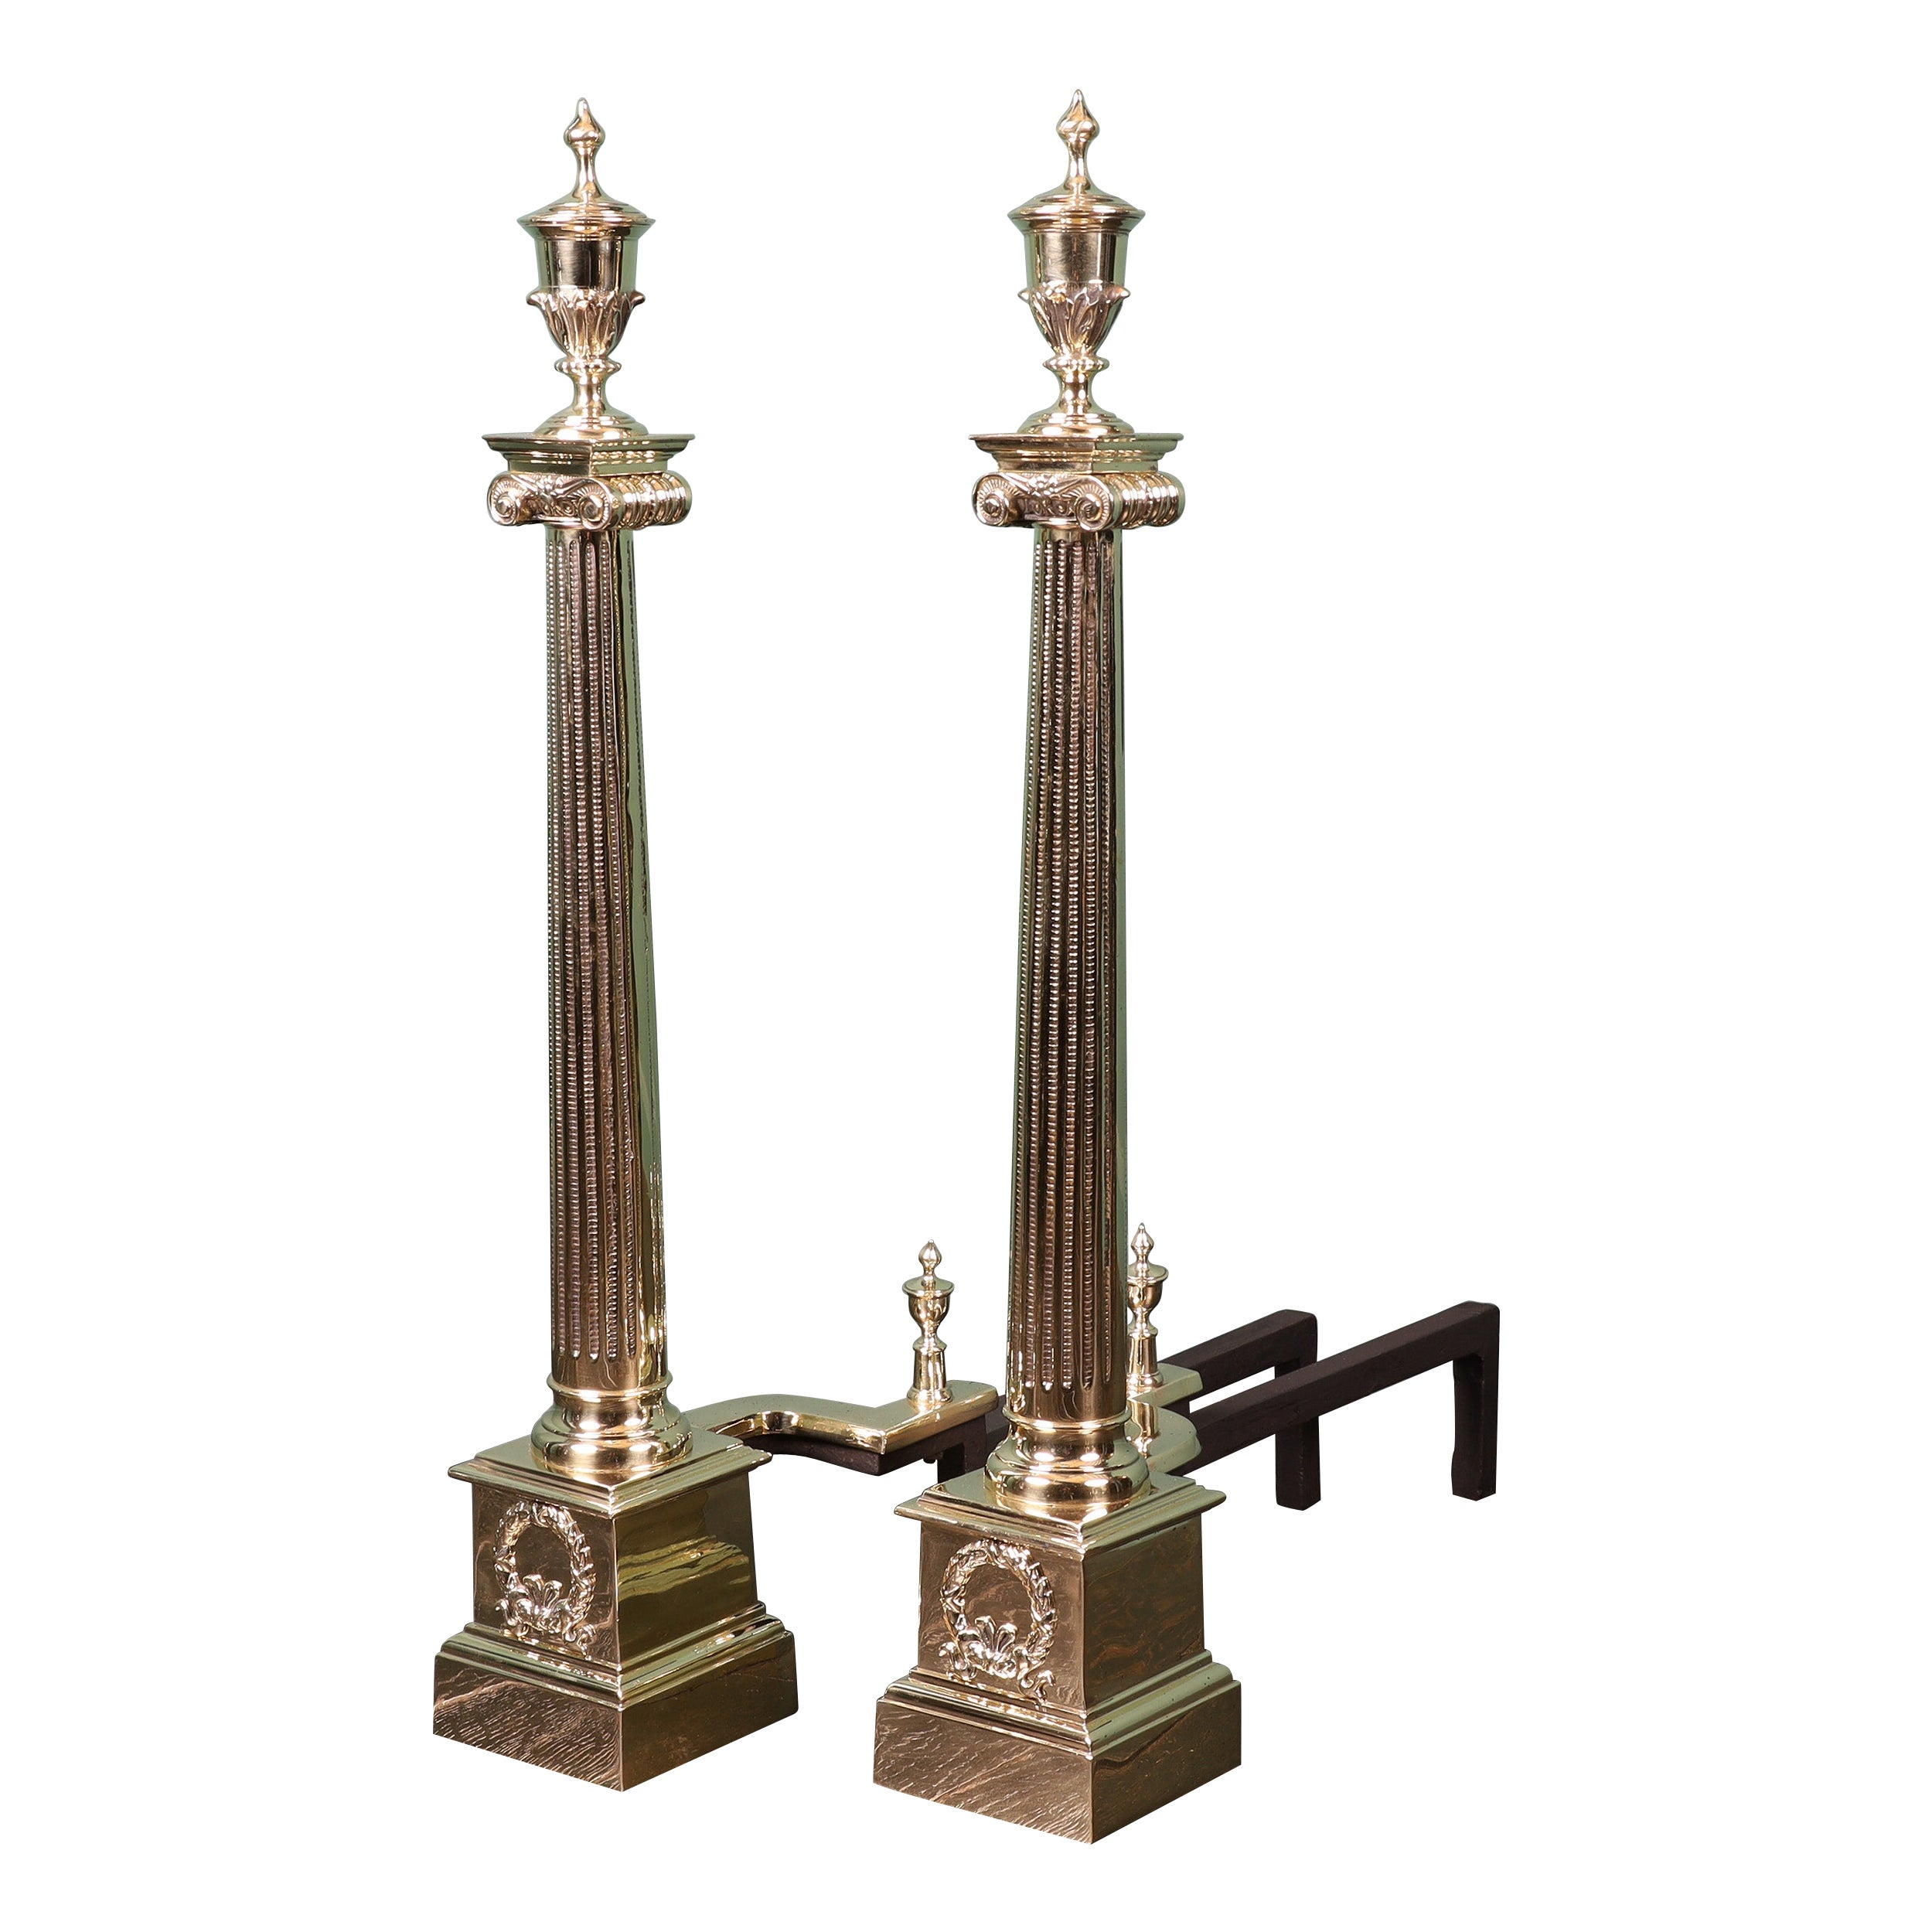 A Pair of 19th Century Neo-Classical Brass Fireplace Andirons